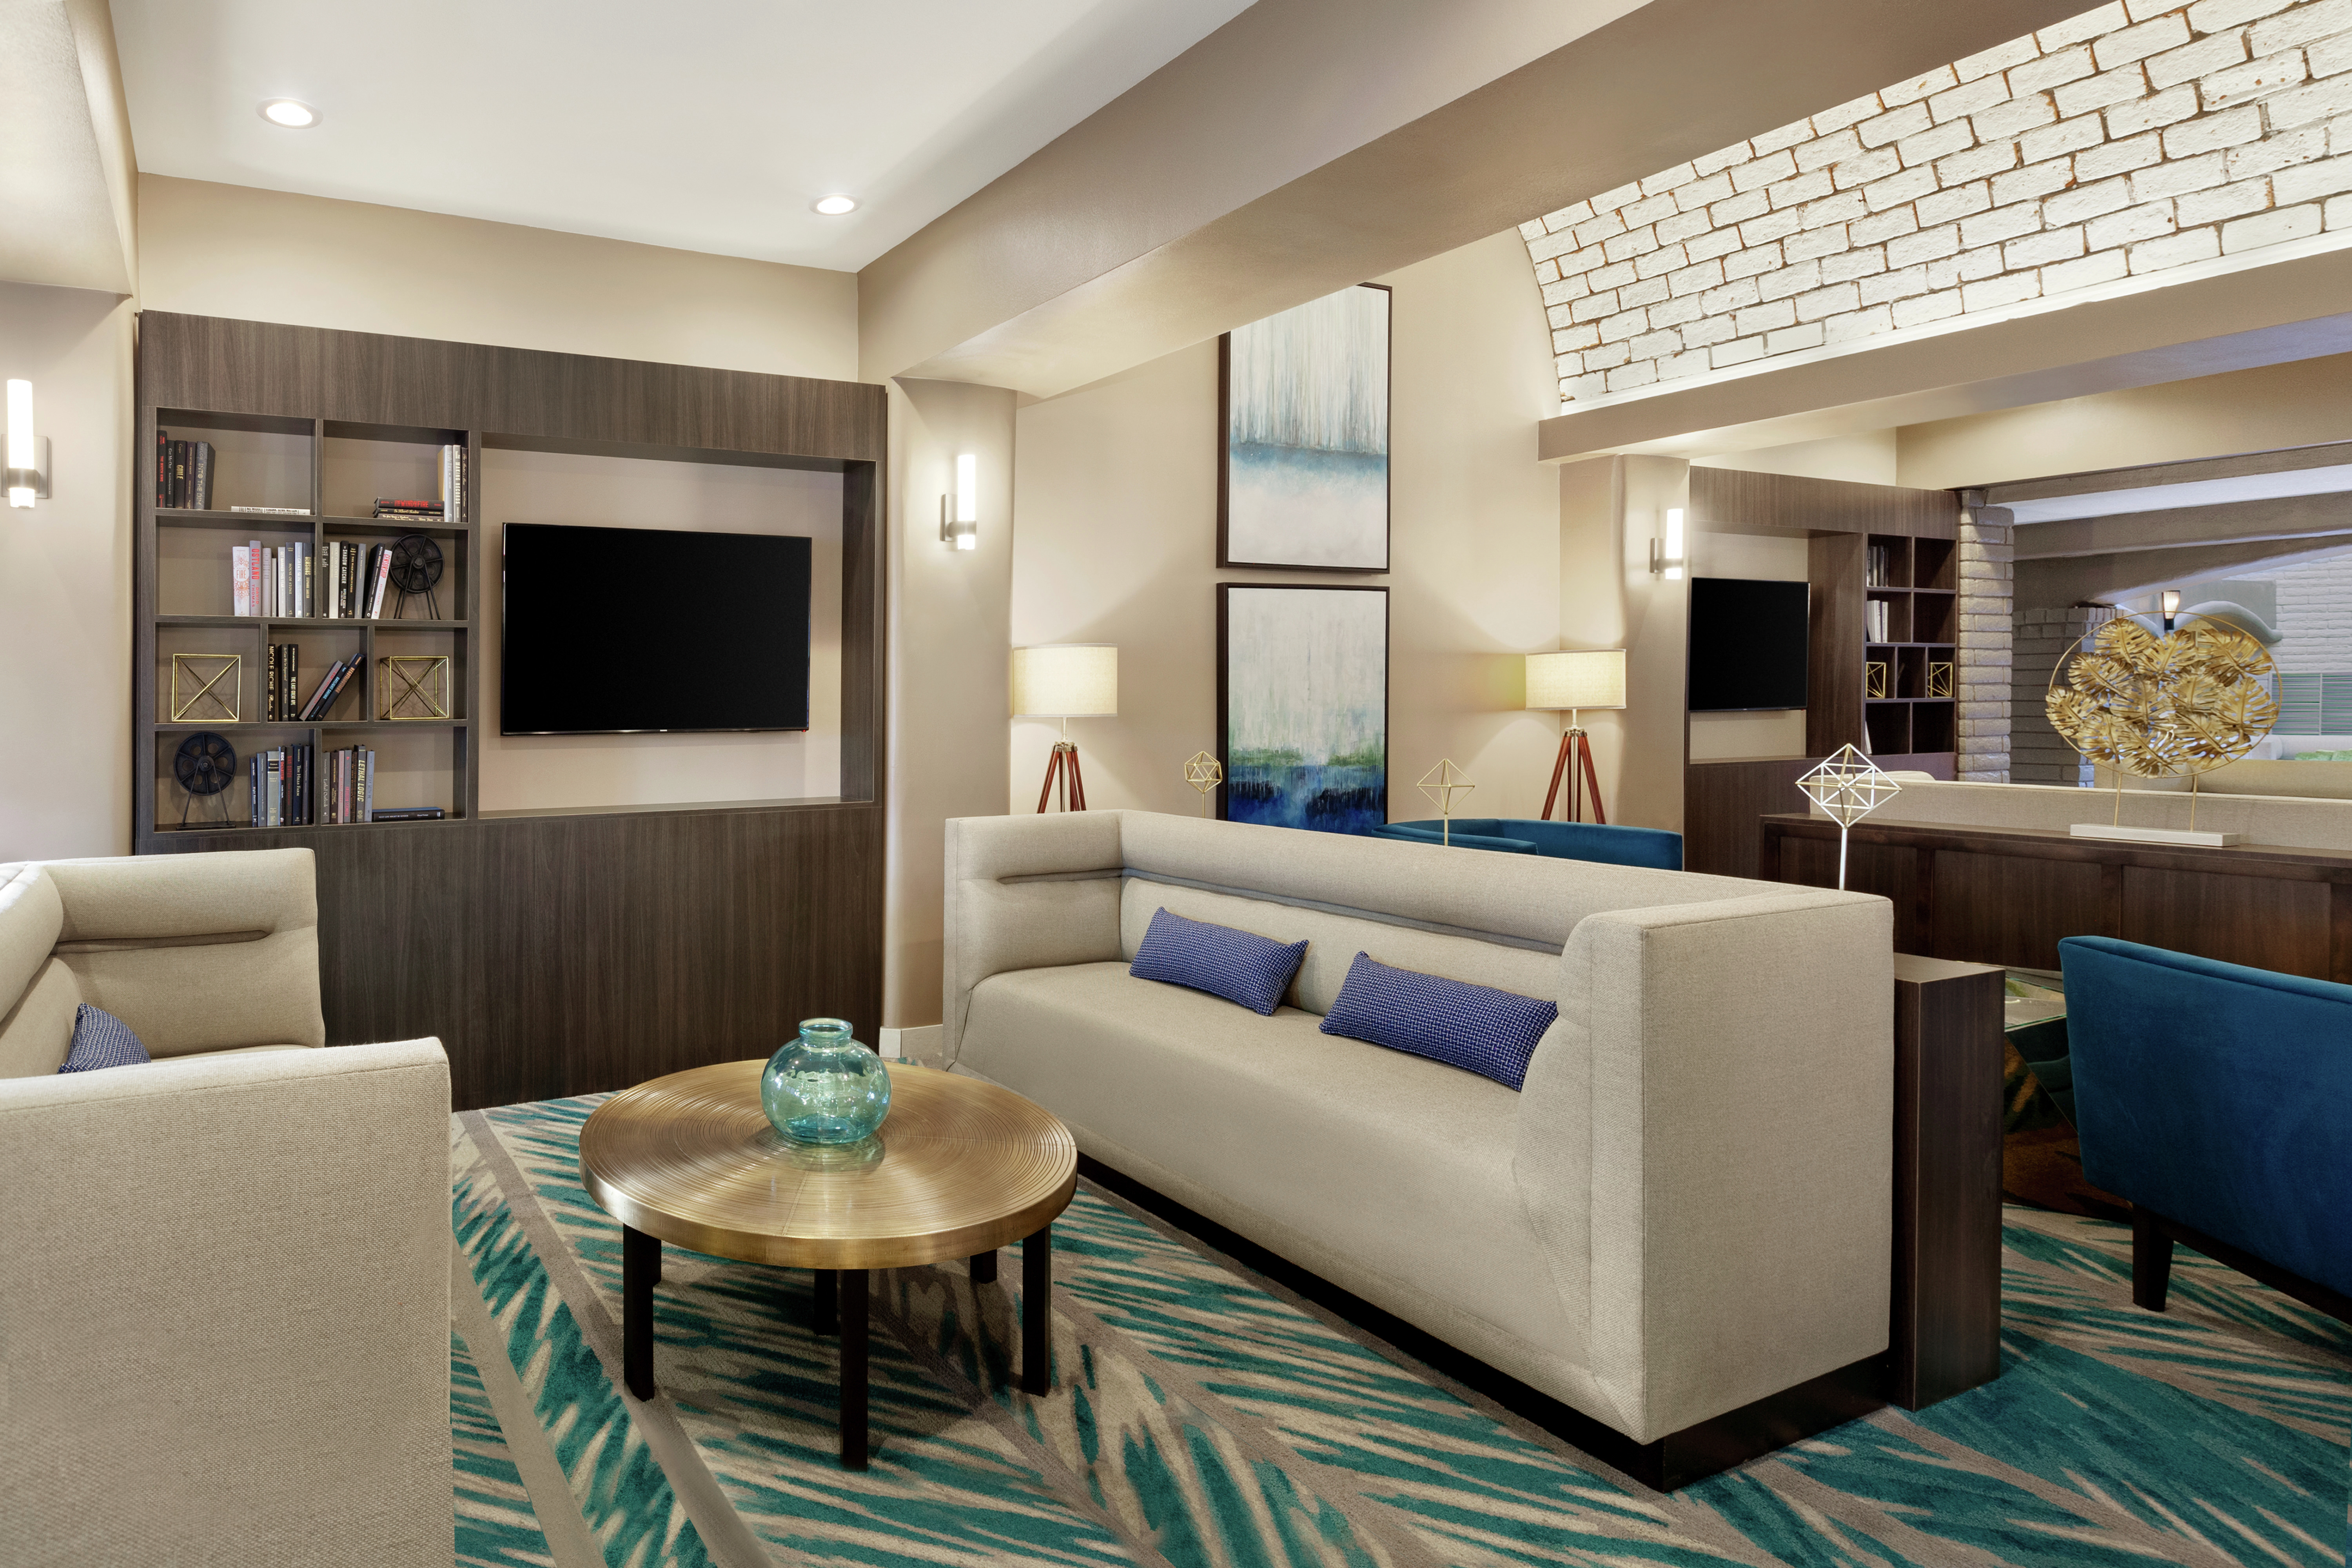 Embassy Suites Lobby and Lounge Area with TV